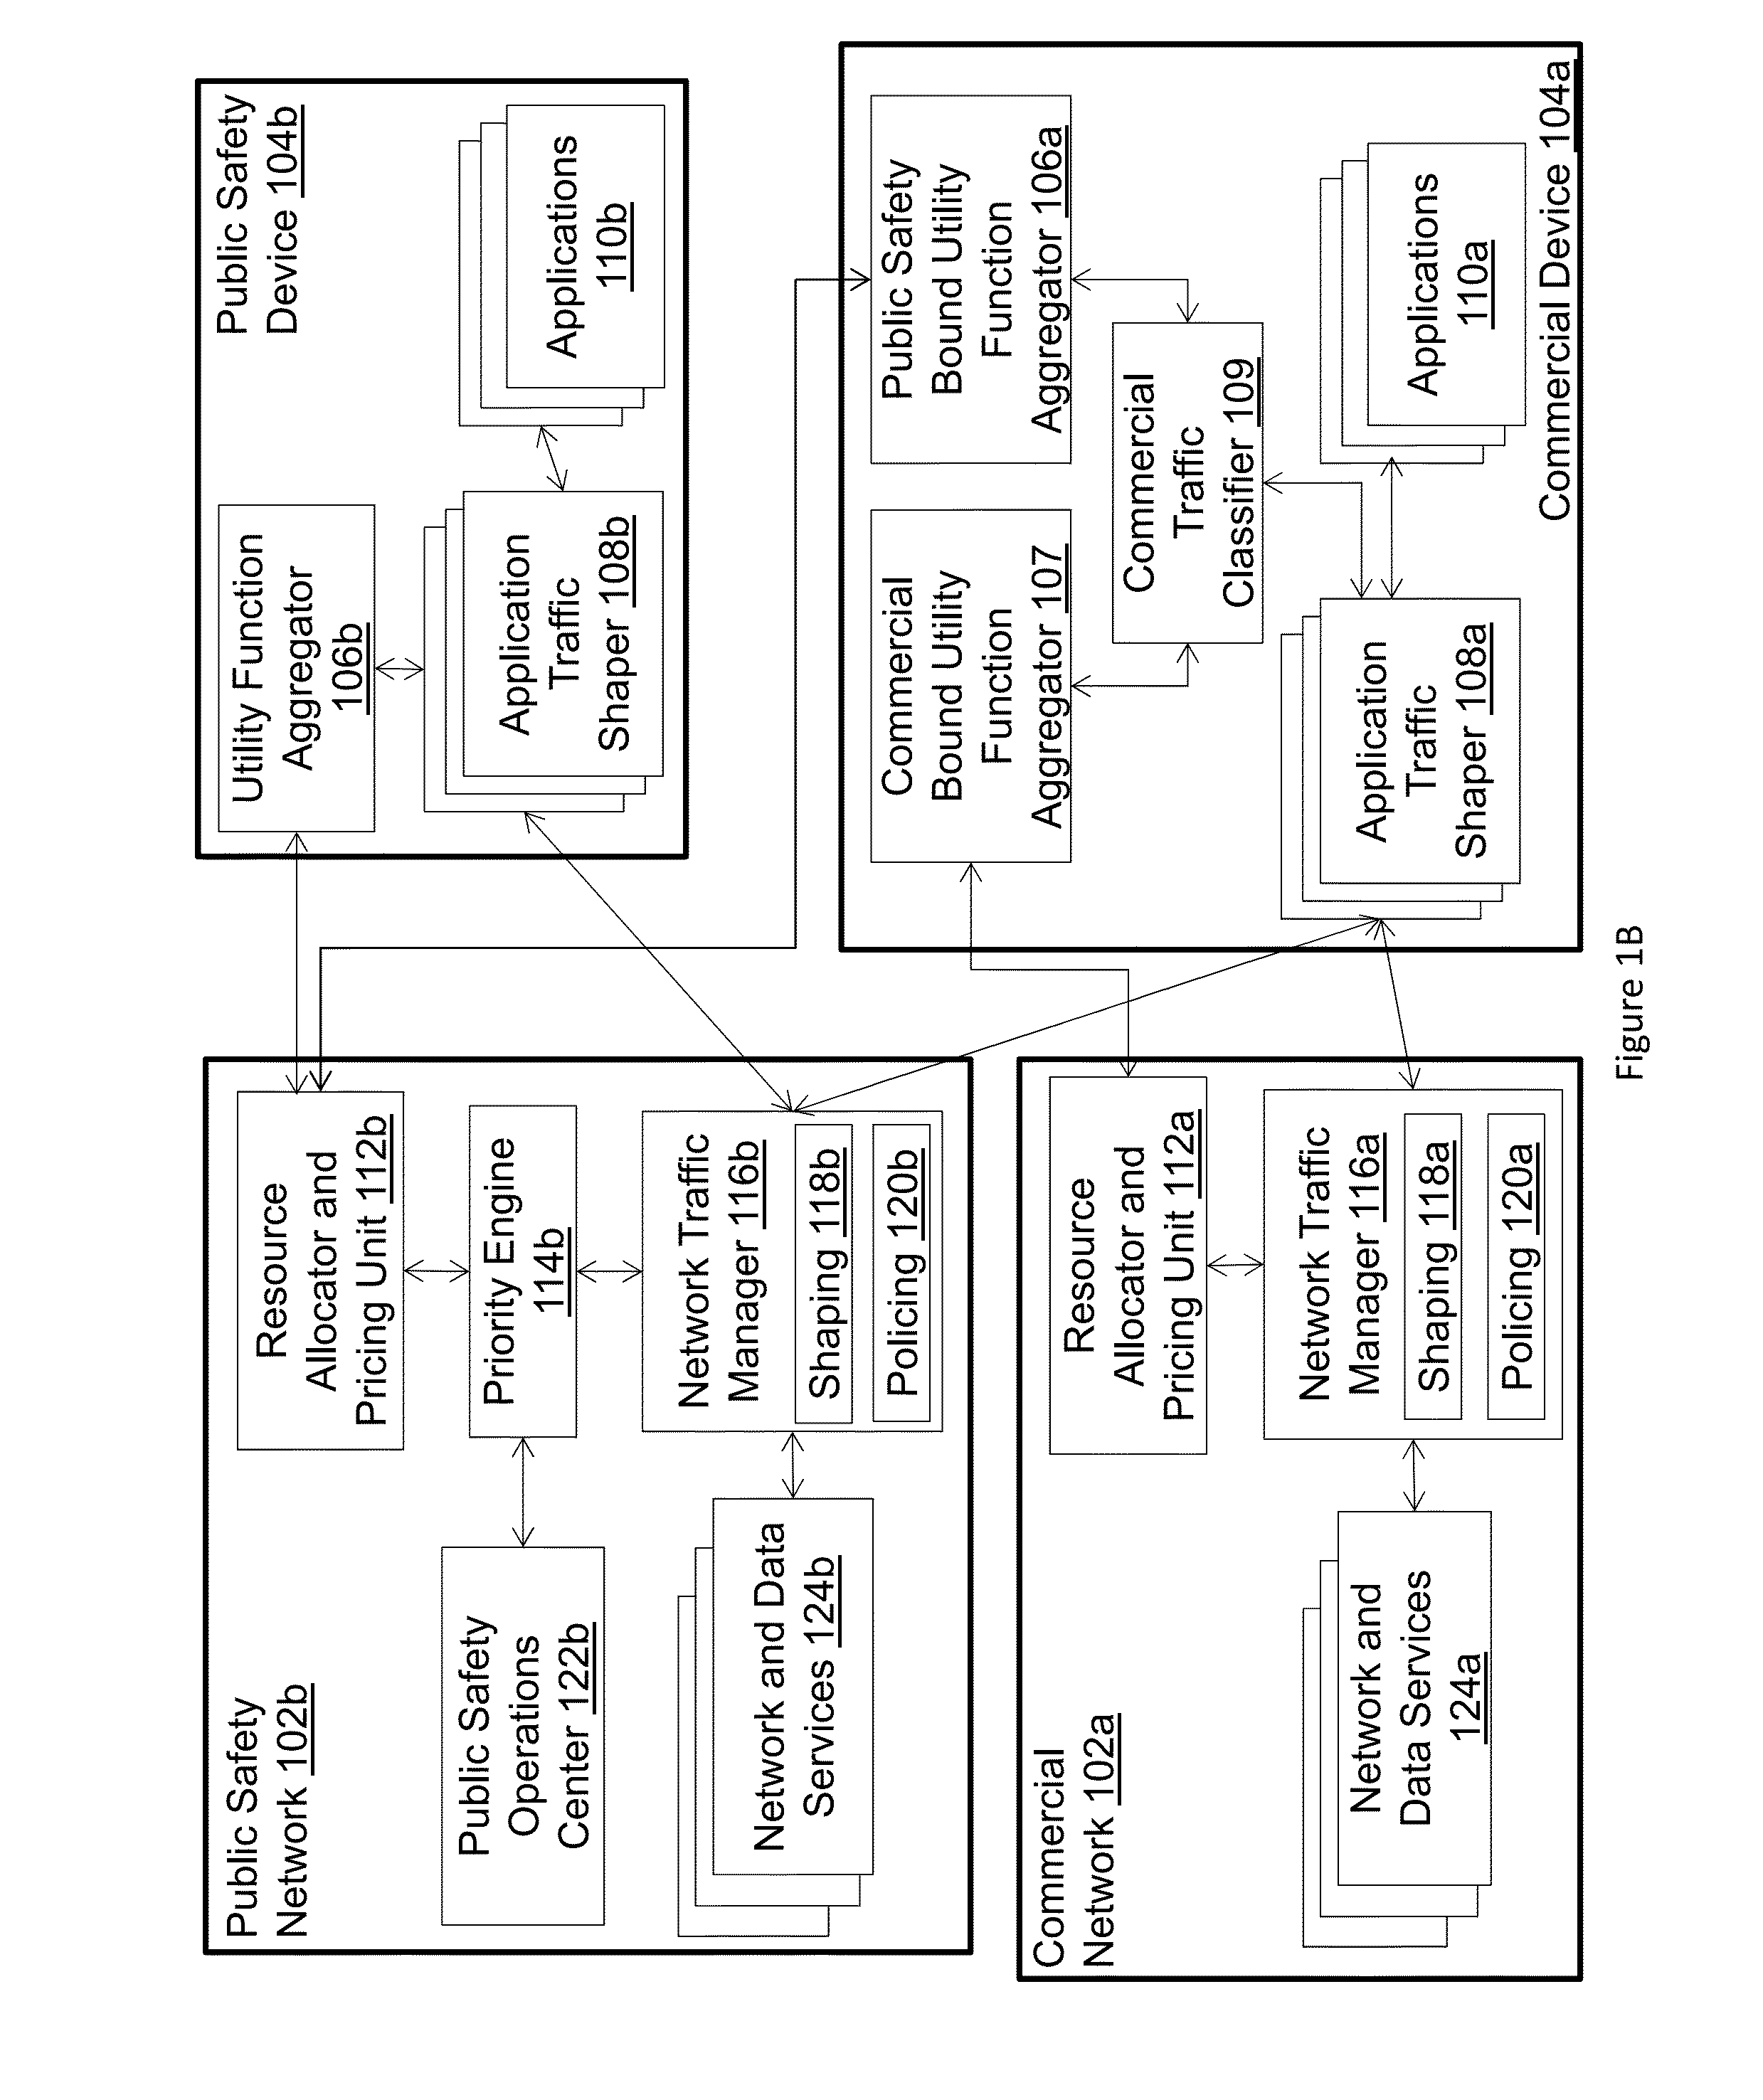 System and method for network sharing between public safety users and commercial users